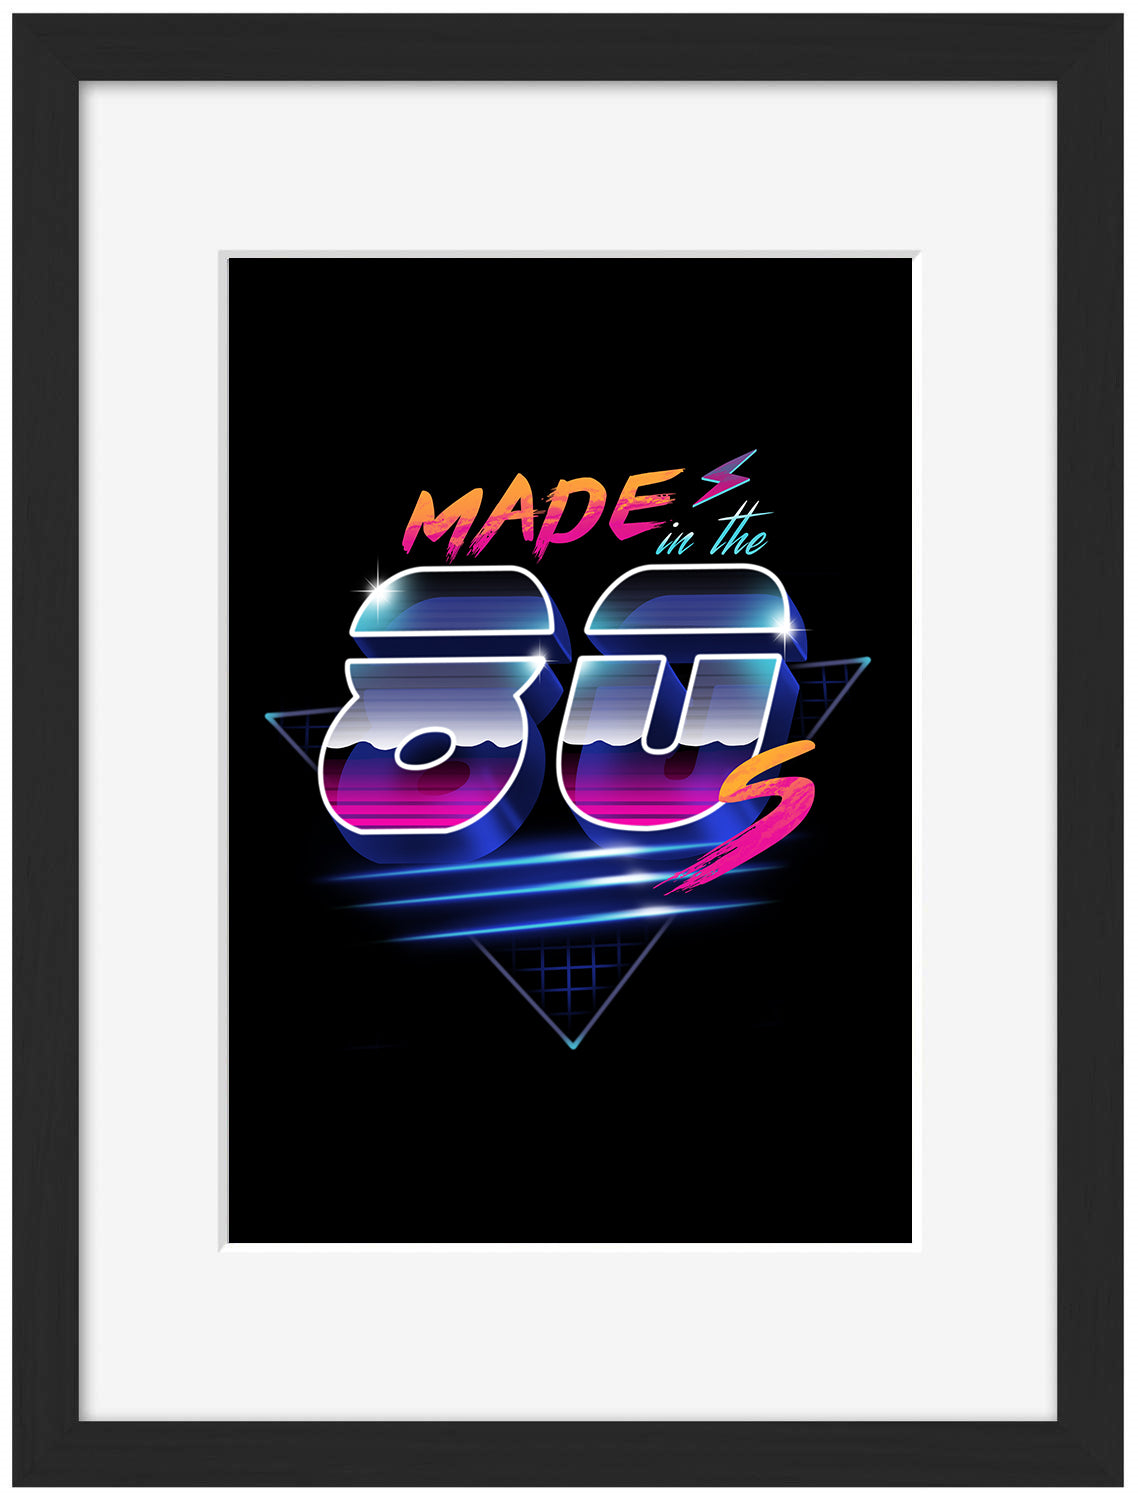 Made in the 80’s-print, vincent-trinidad-Framed Print-30 x 40 cm-BLUE SHAKER